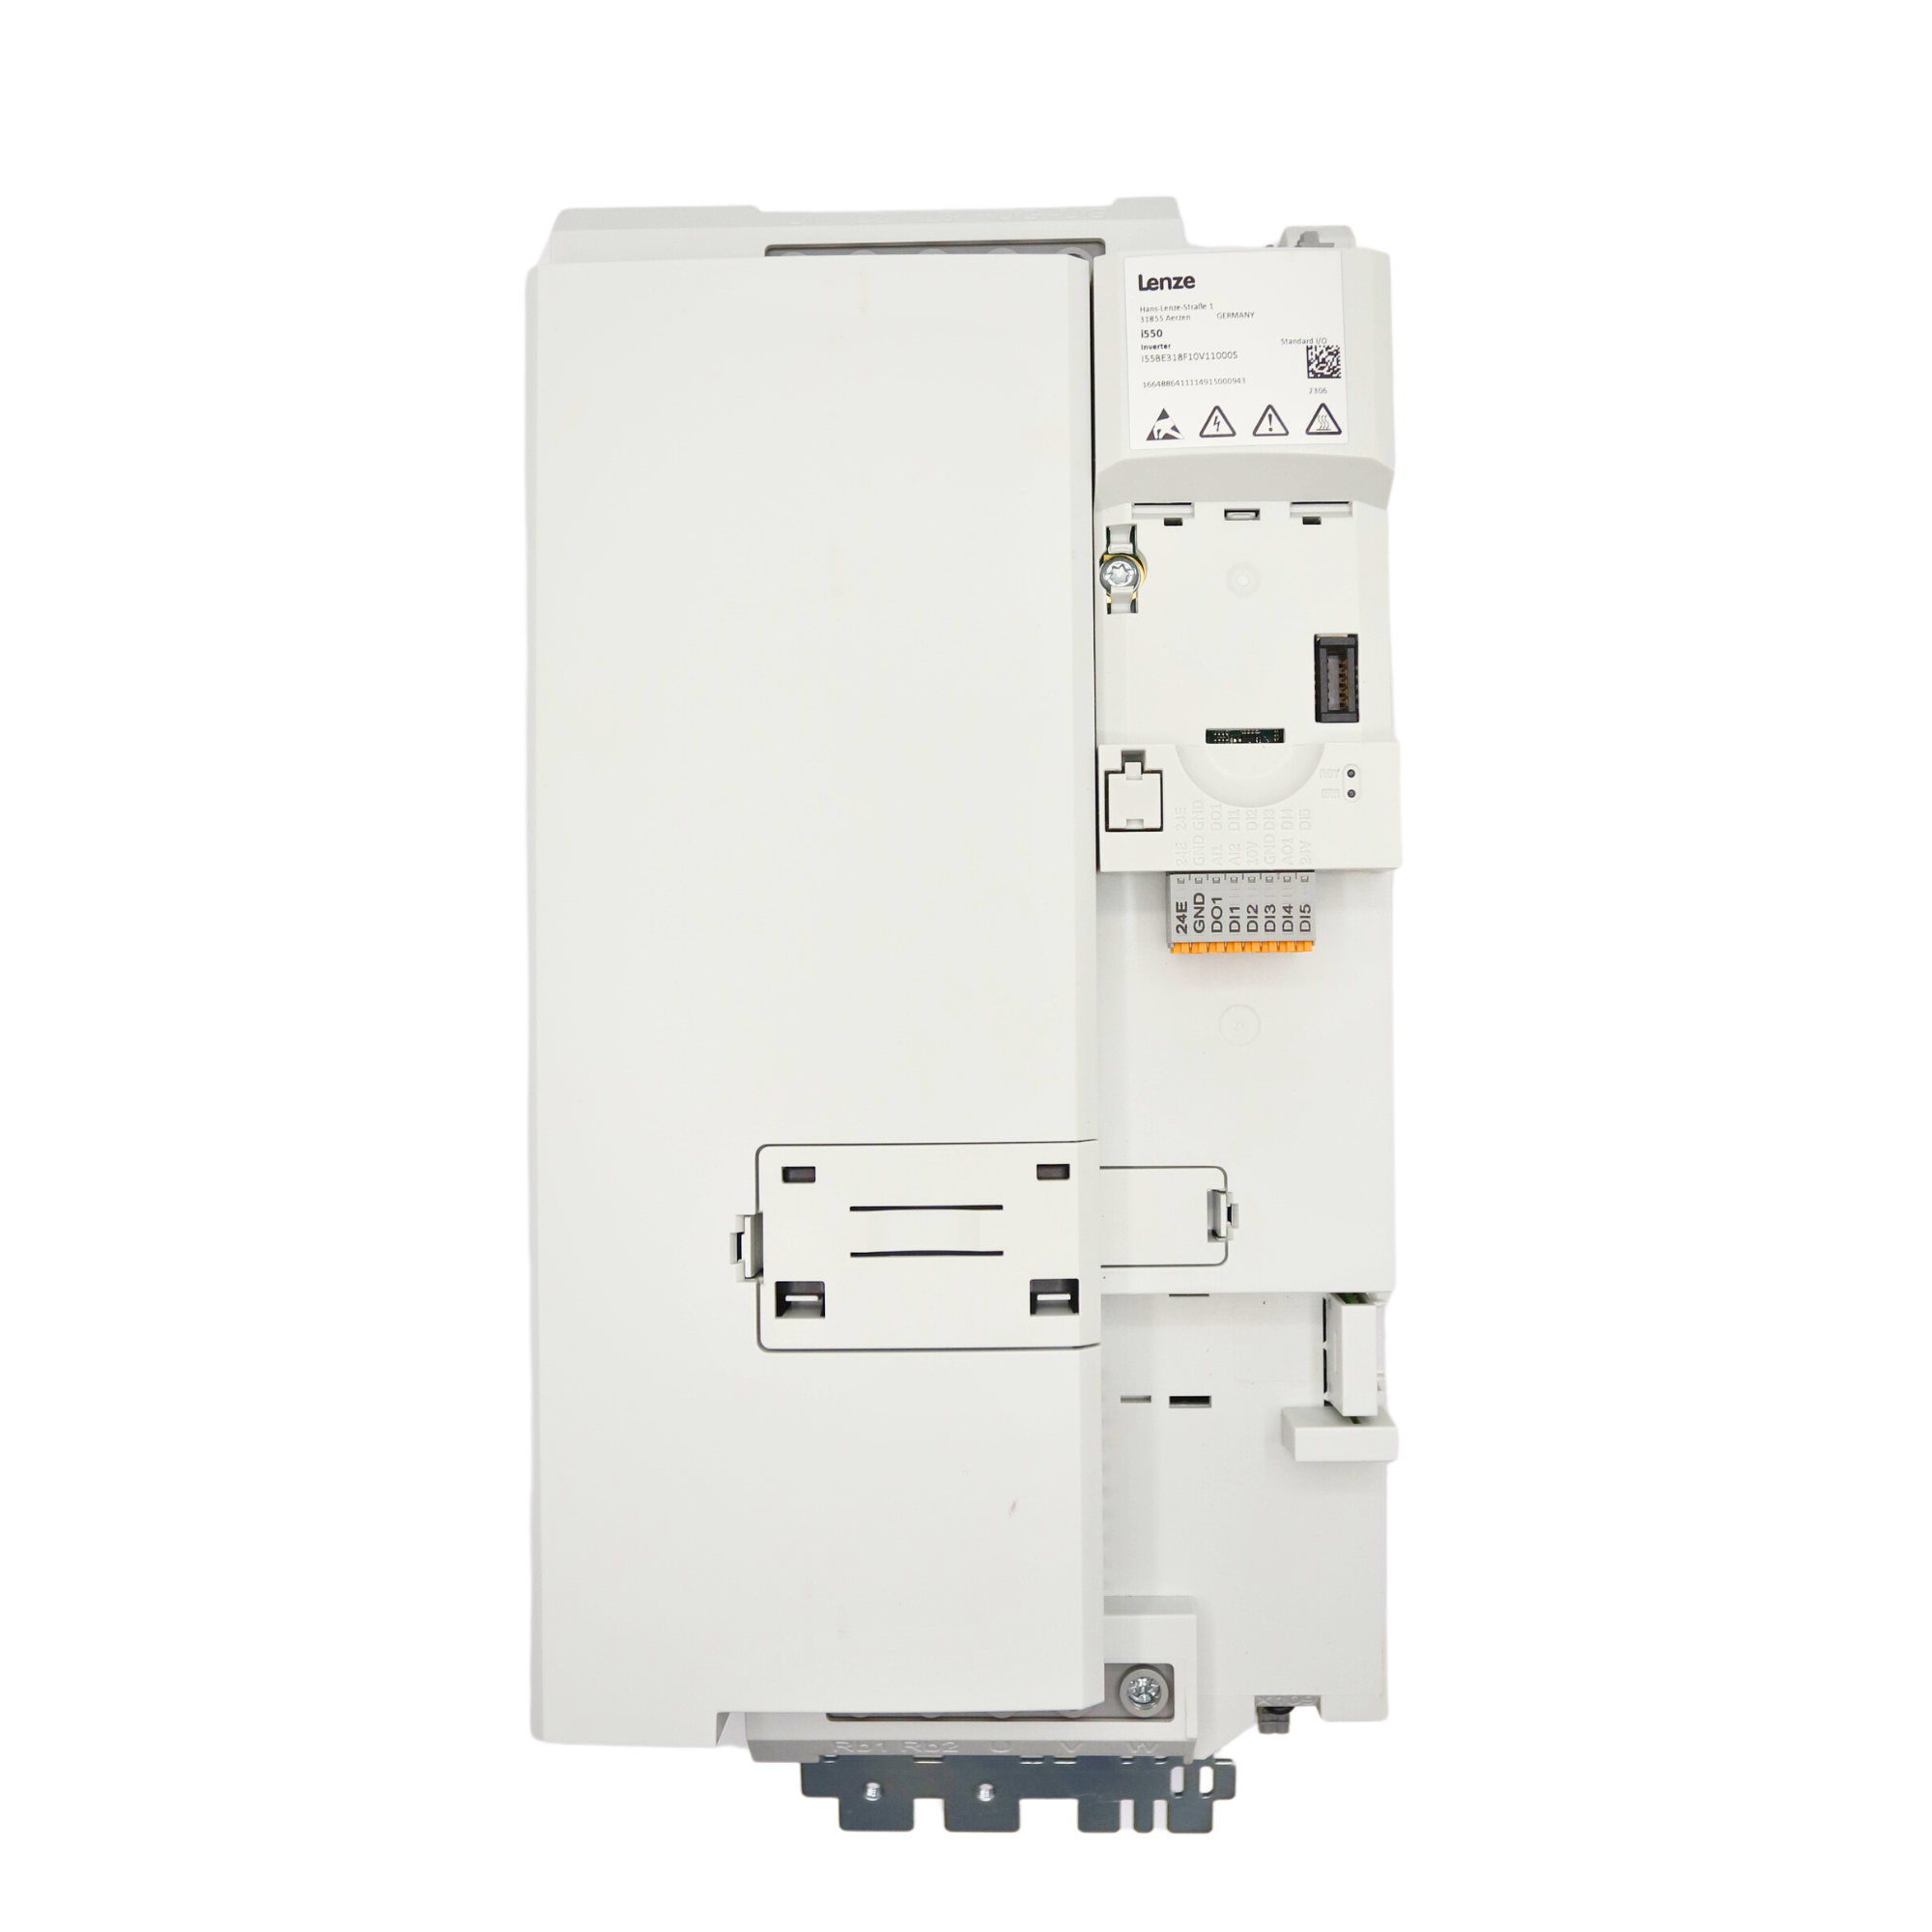 Lenze | i550 25hp Cabinet mount, fieldbus and STO capable, 480volt 5digital inputs, 2 analog inputs, 1 digital output 1 analog Output, 1 relay | I55BE318F10V11000S - front view